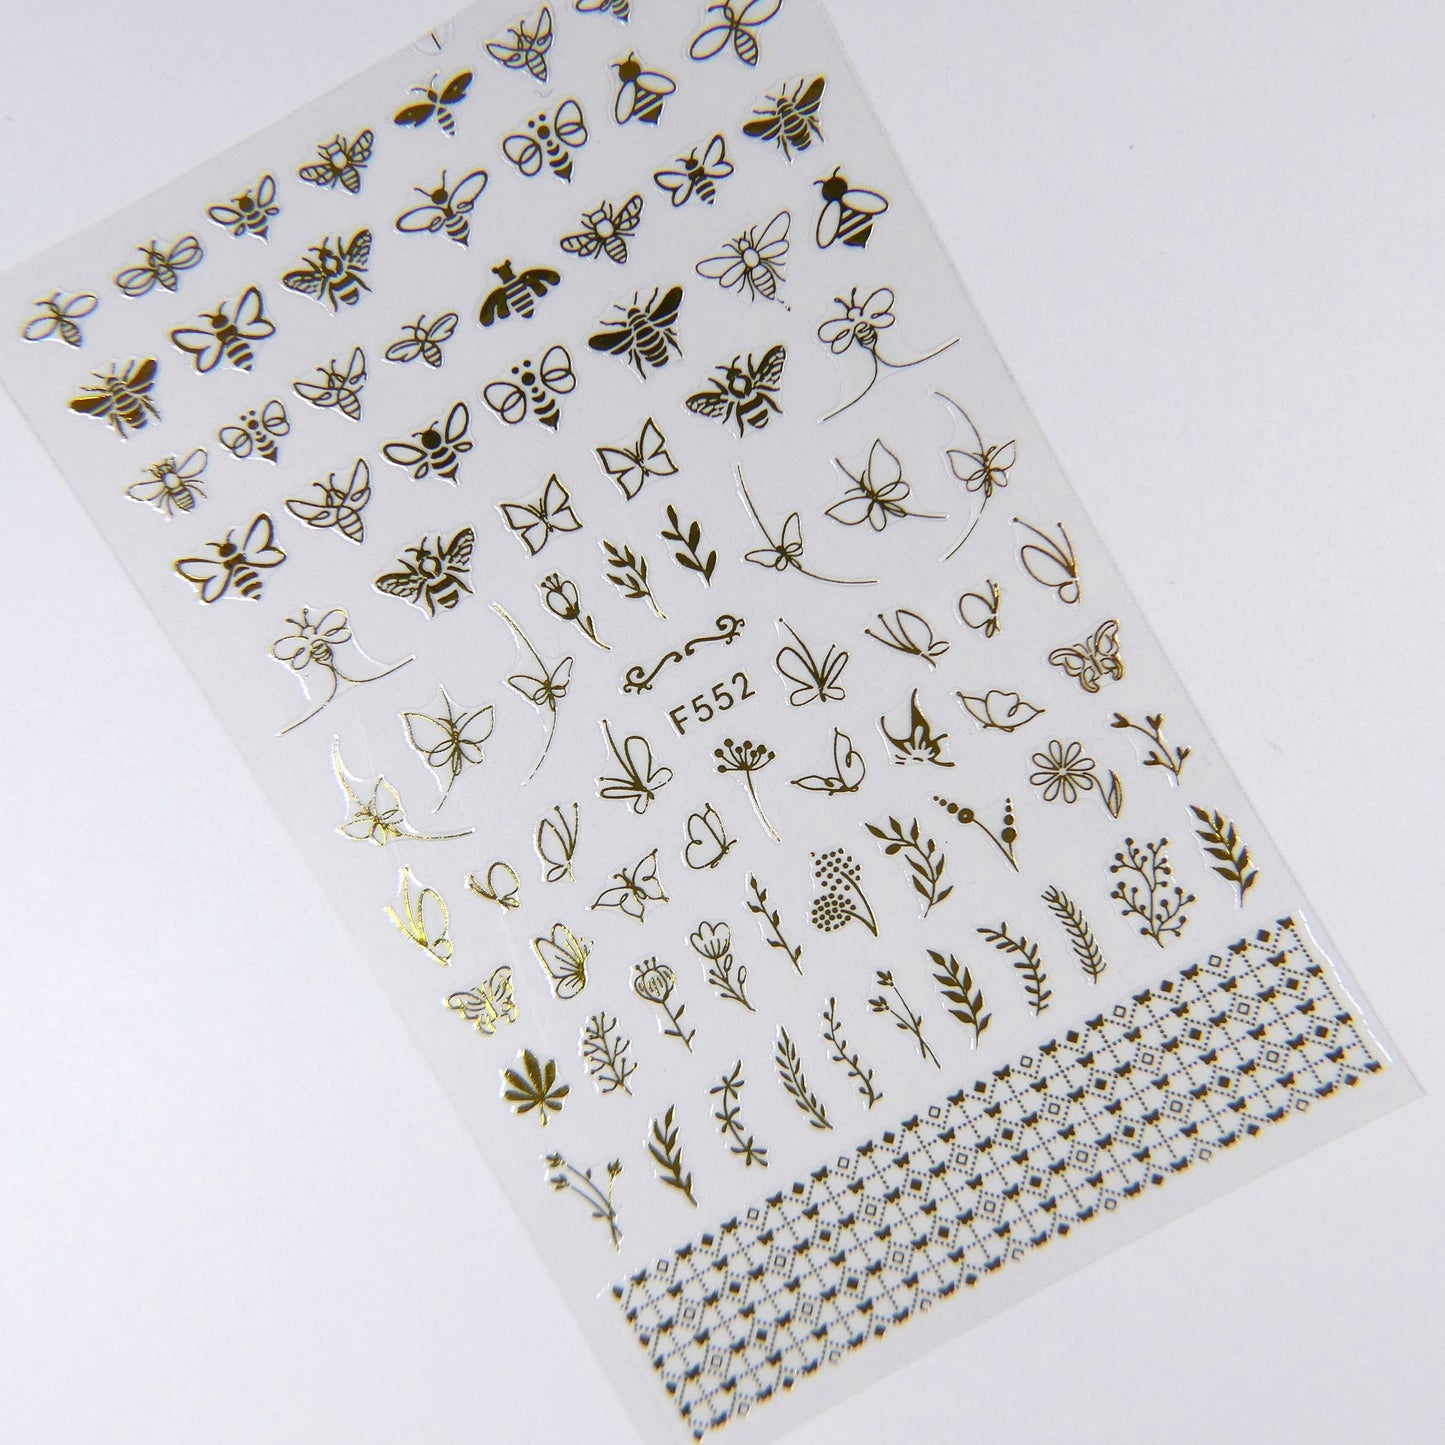 Load image into Gallery viewer, Gold Bees Sticker #19 - My Little Nail Art Shop
